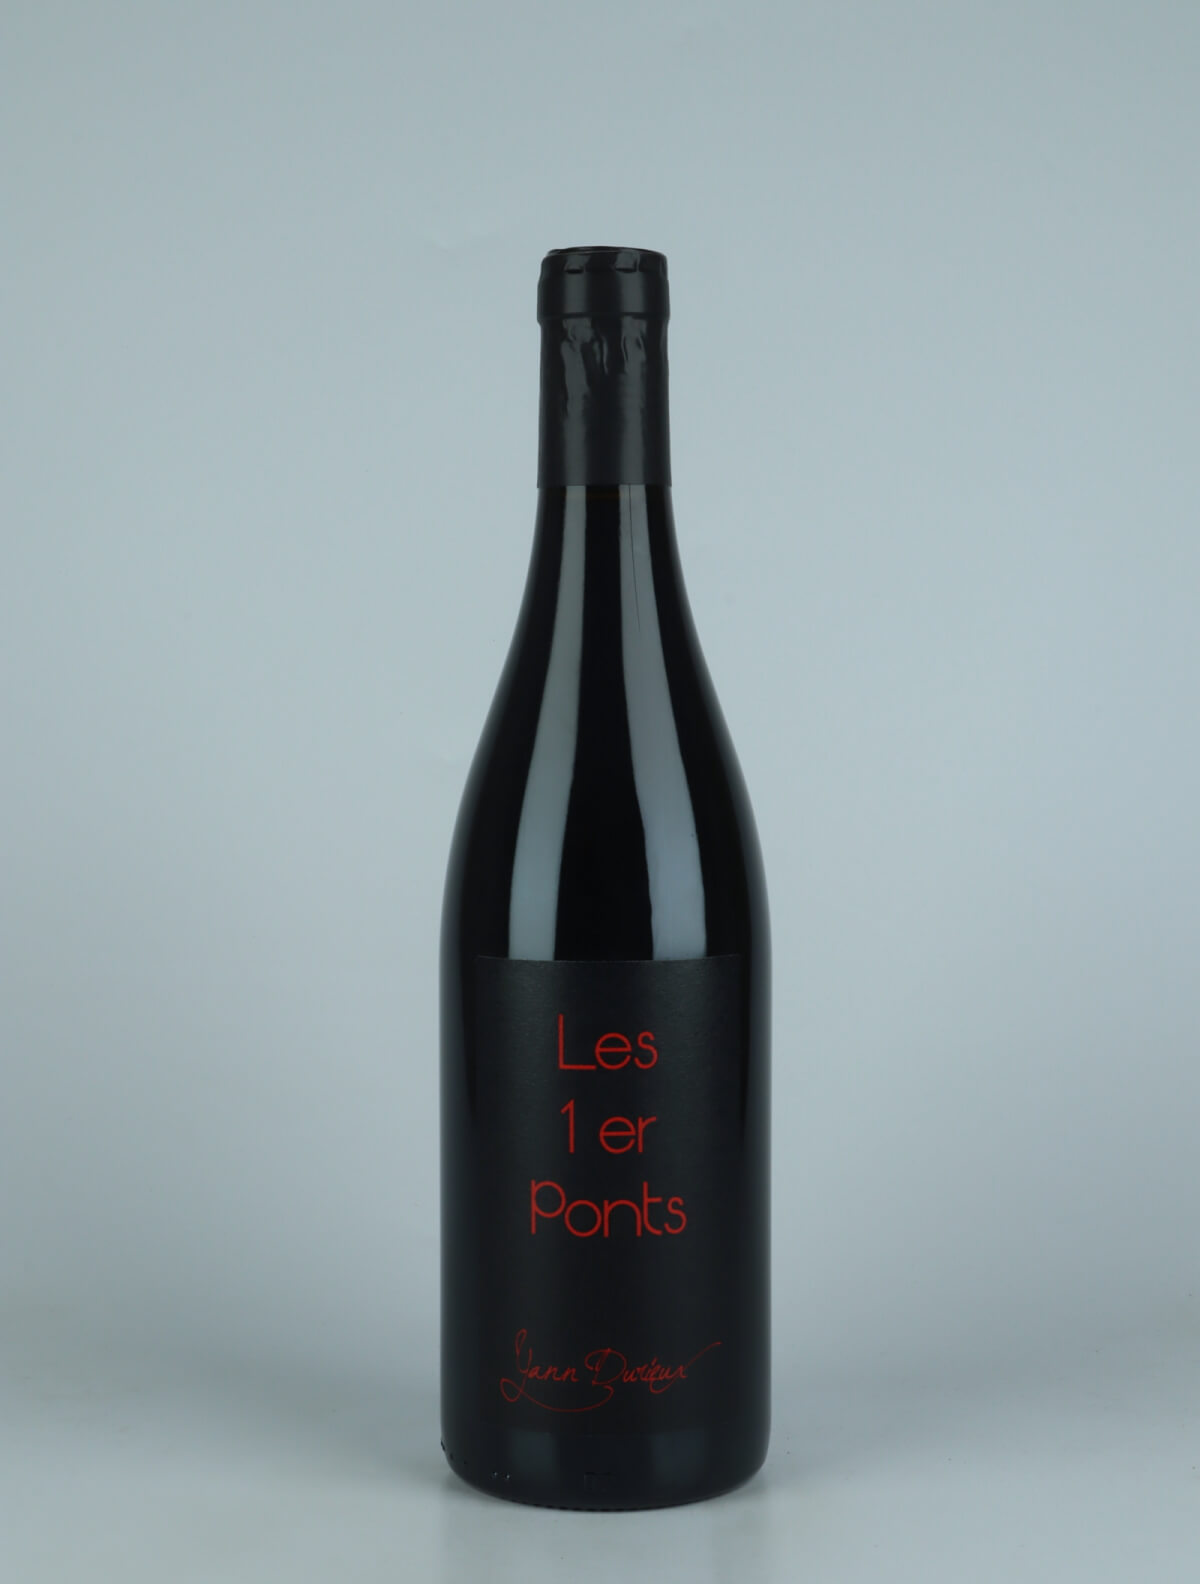 A bottle 2020 Les 1er Ponts Red wine from Yann Durieux, Burgundy in France